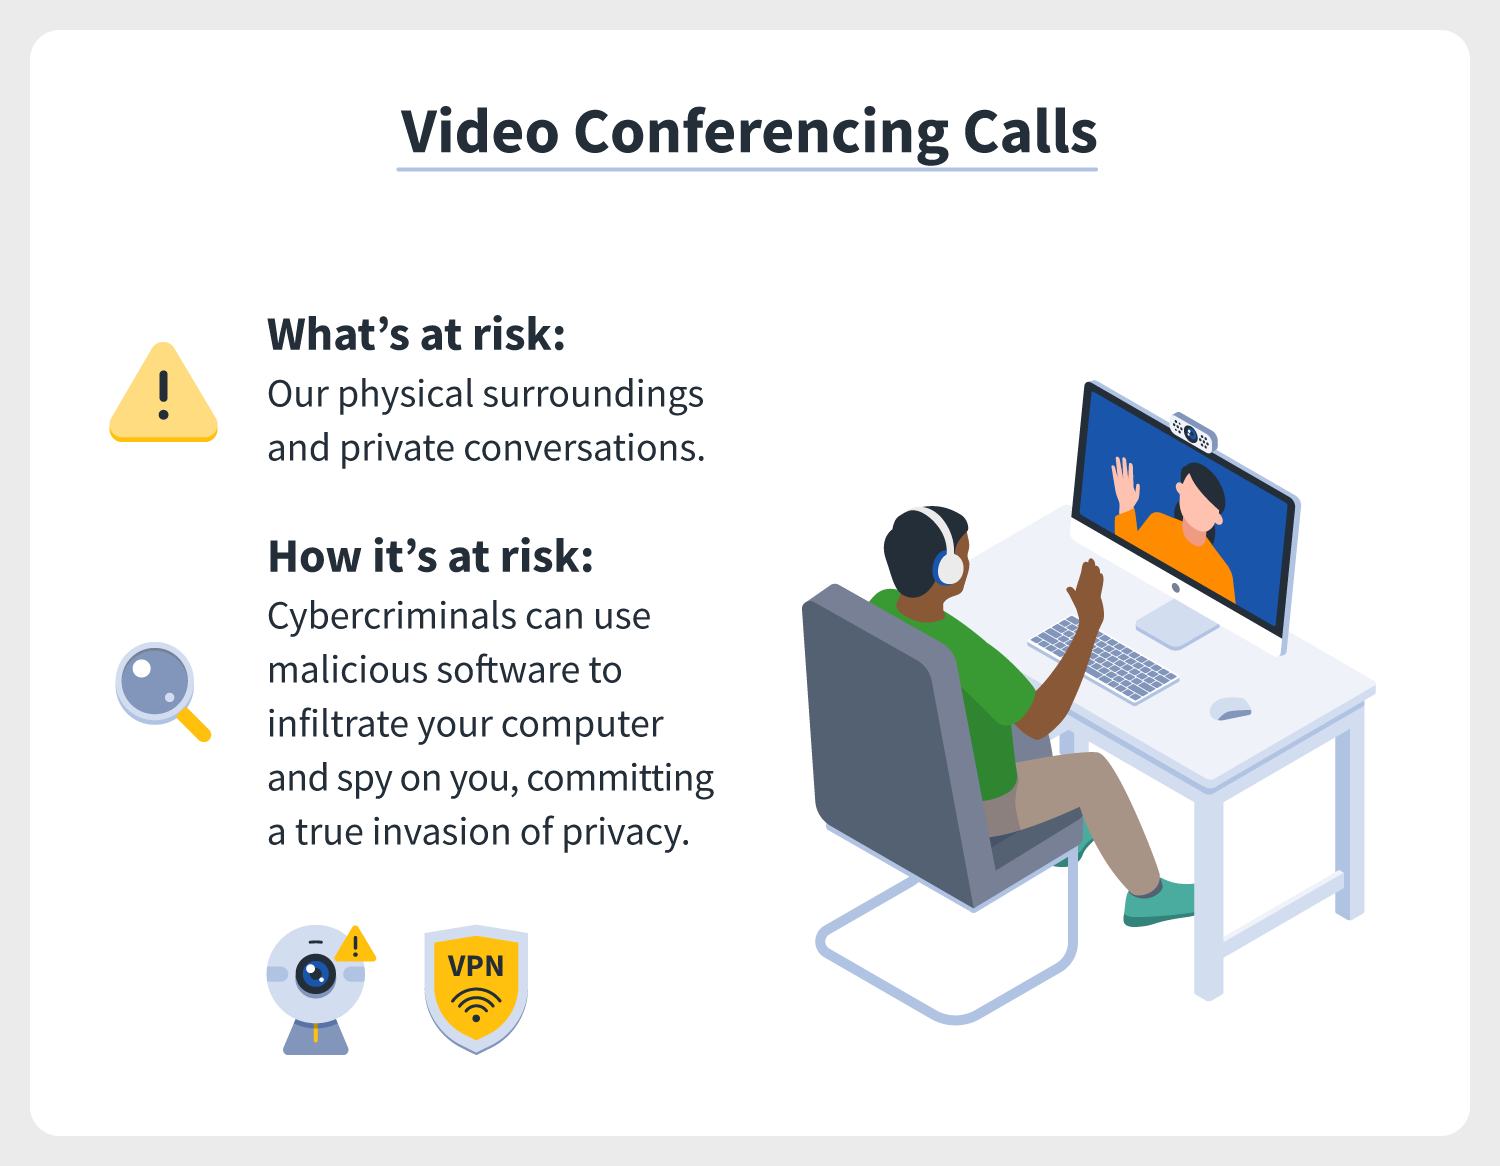 an illustration of two people video conferencing, indicating they should practice webcam awareness to protect their privacy online